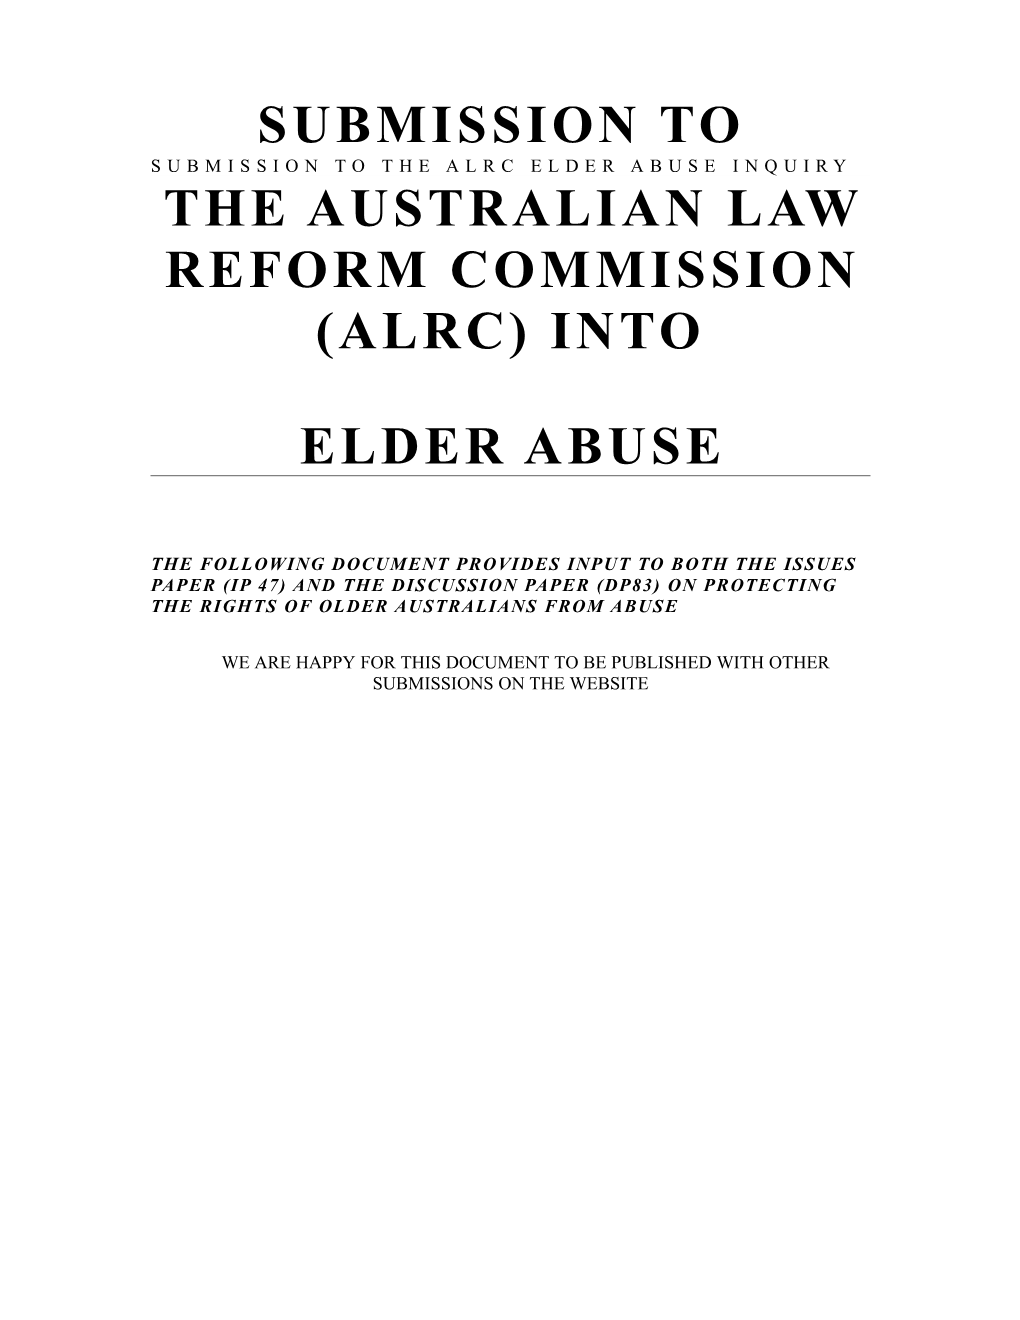 Submission to the ALRC Elder Abuse Inquiry